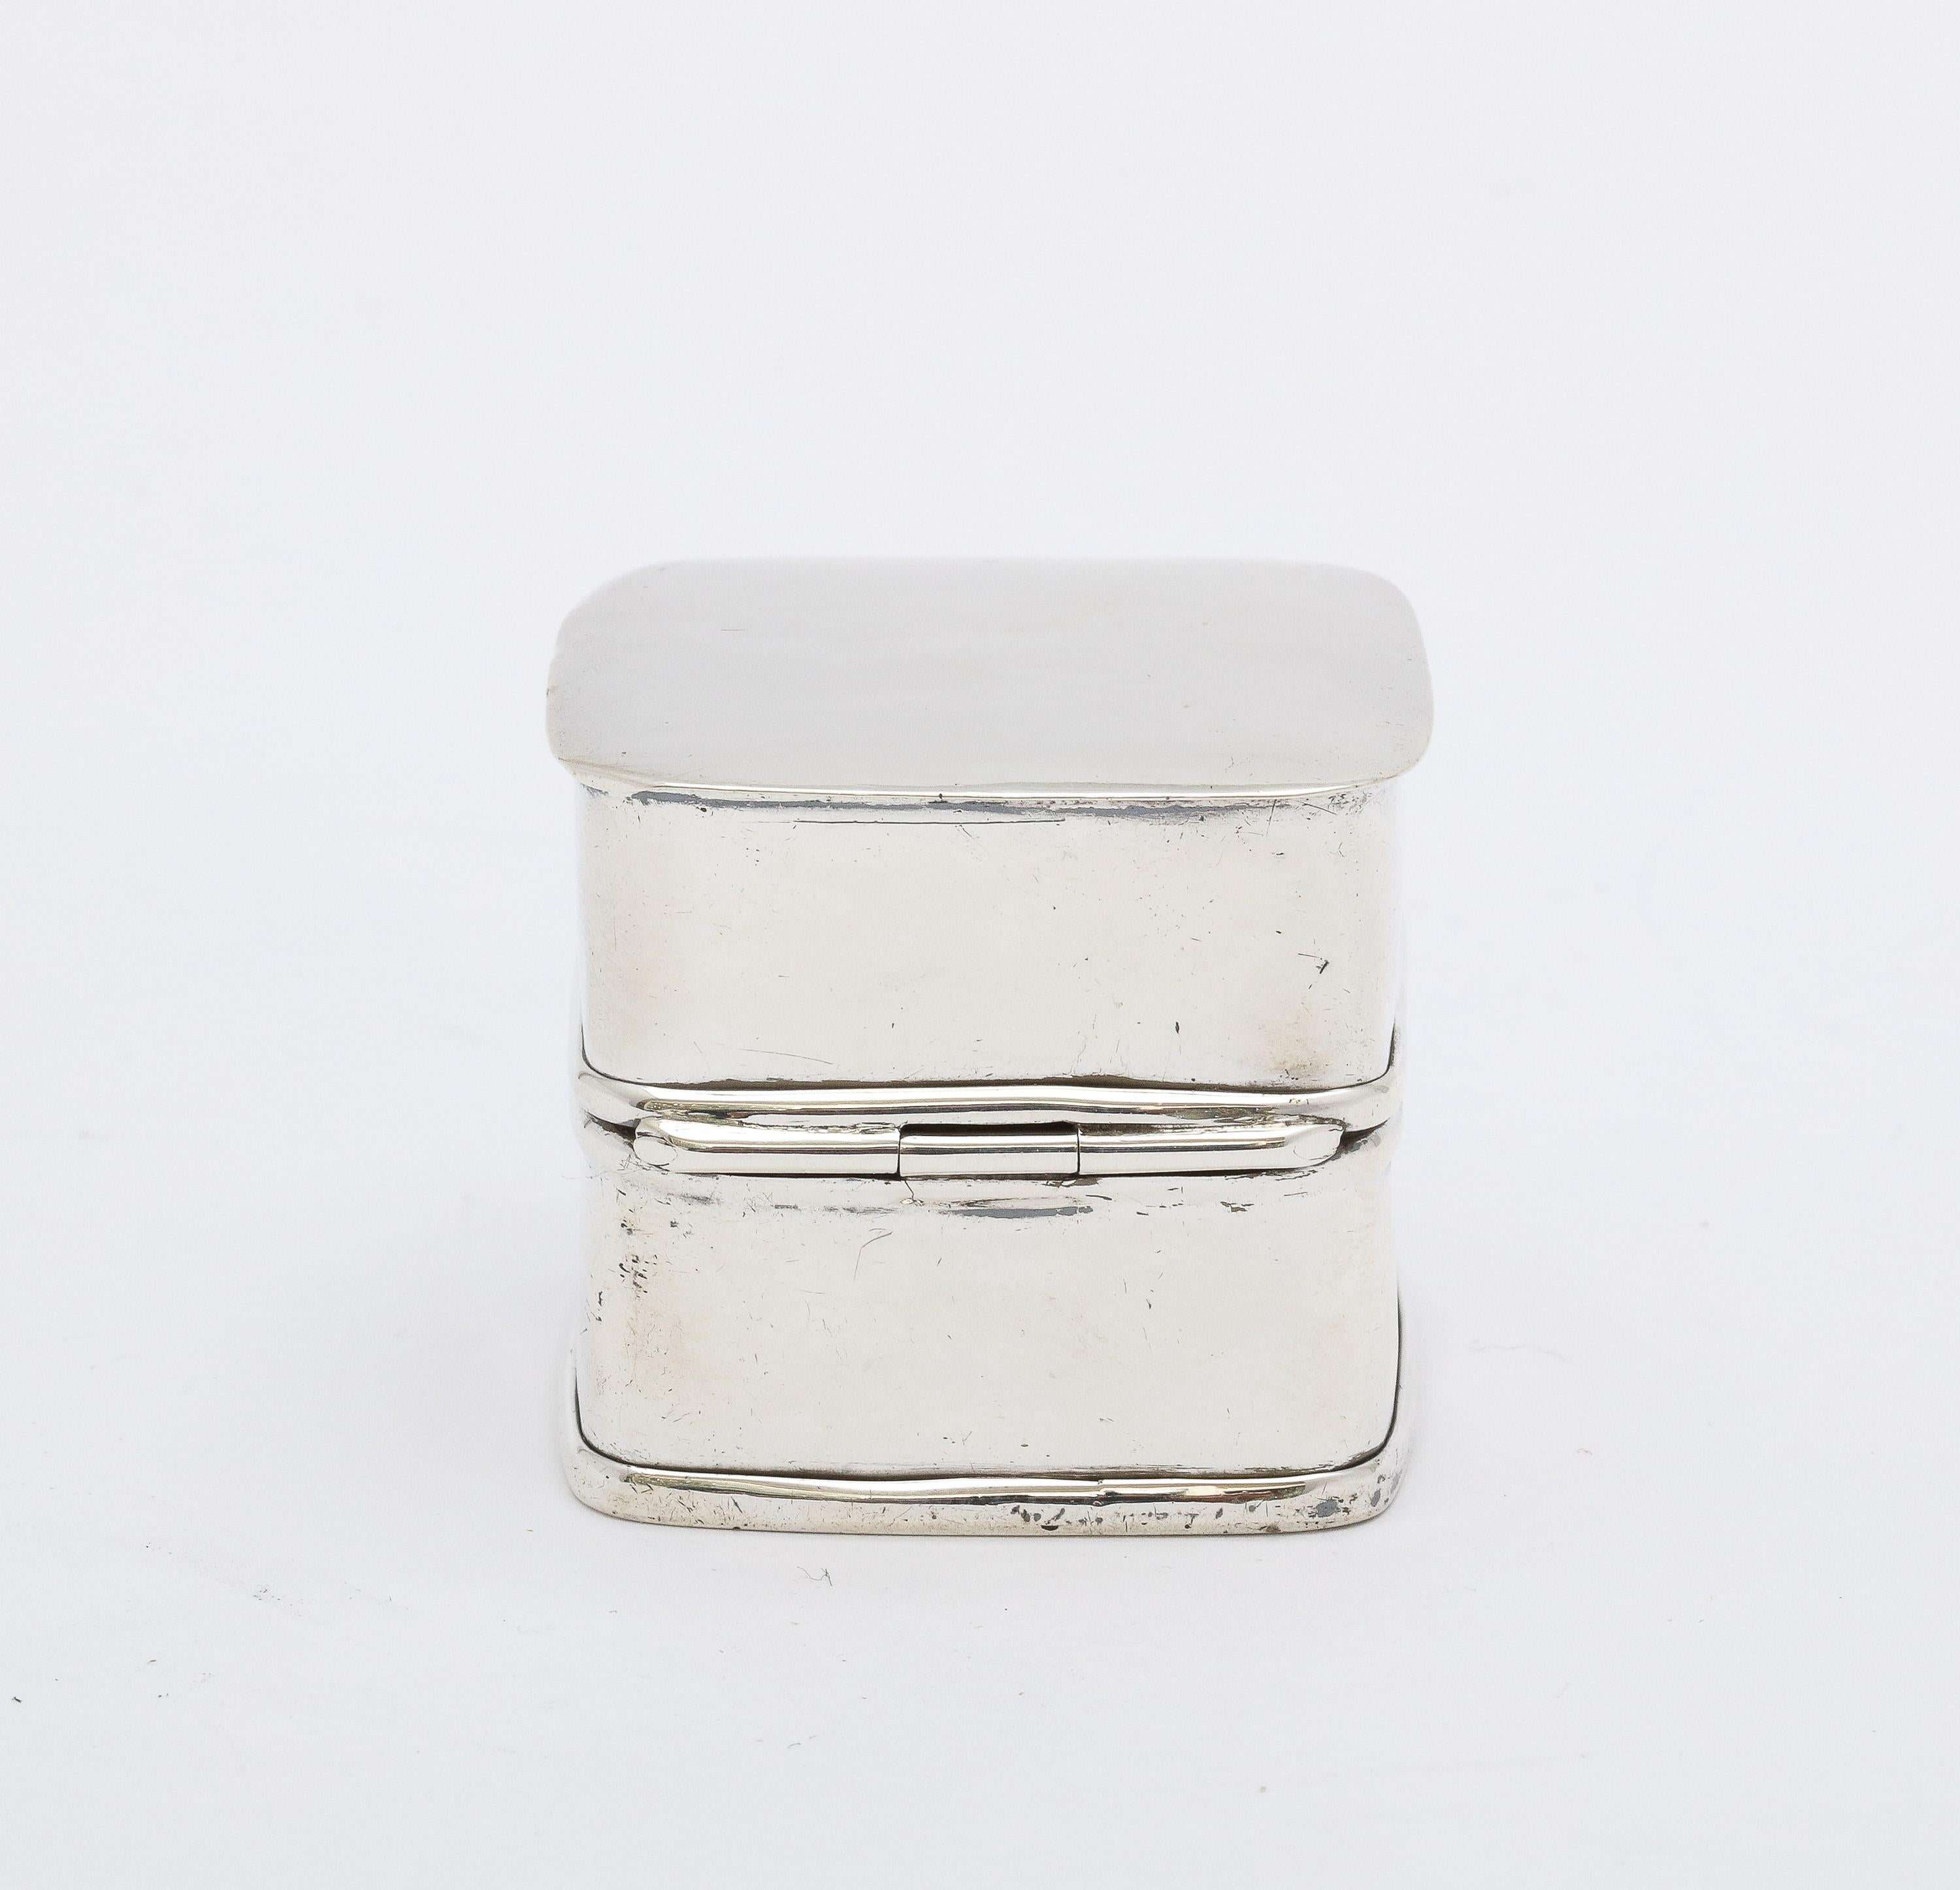 Edwadian Period Sterling Silver Ring Box In Good Condition For Sale In New York, NY